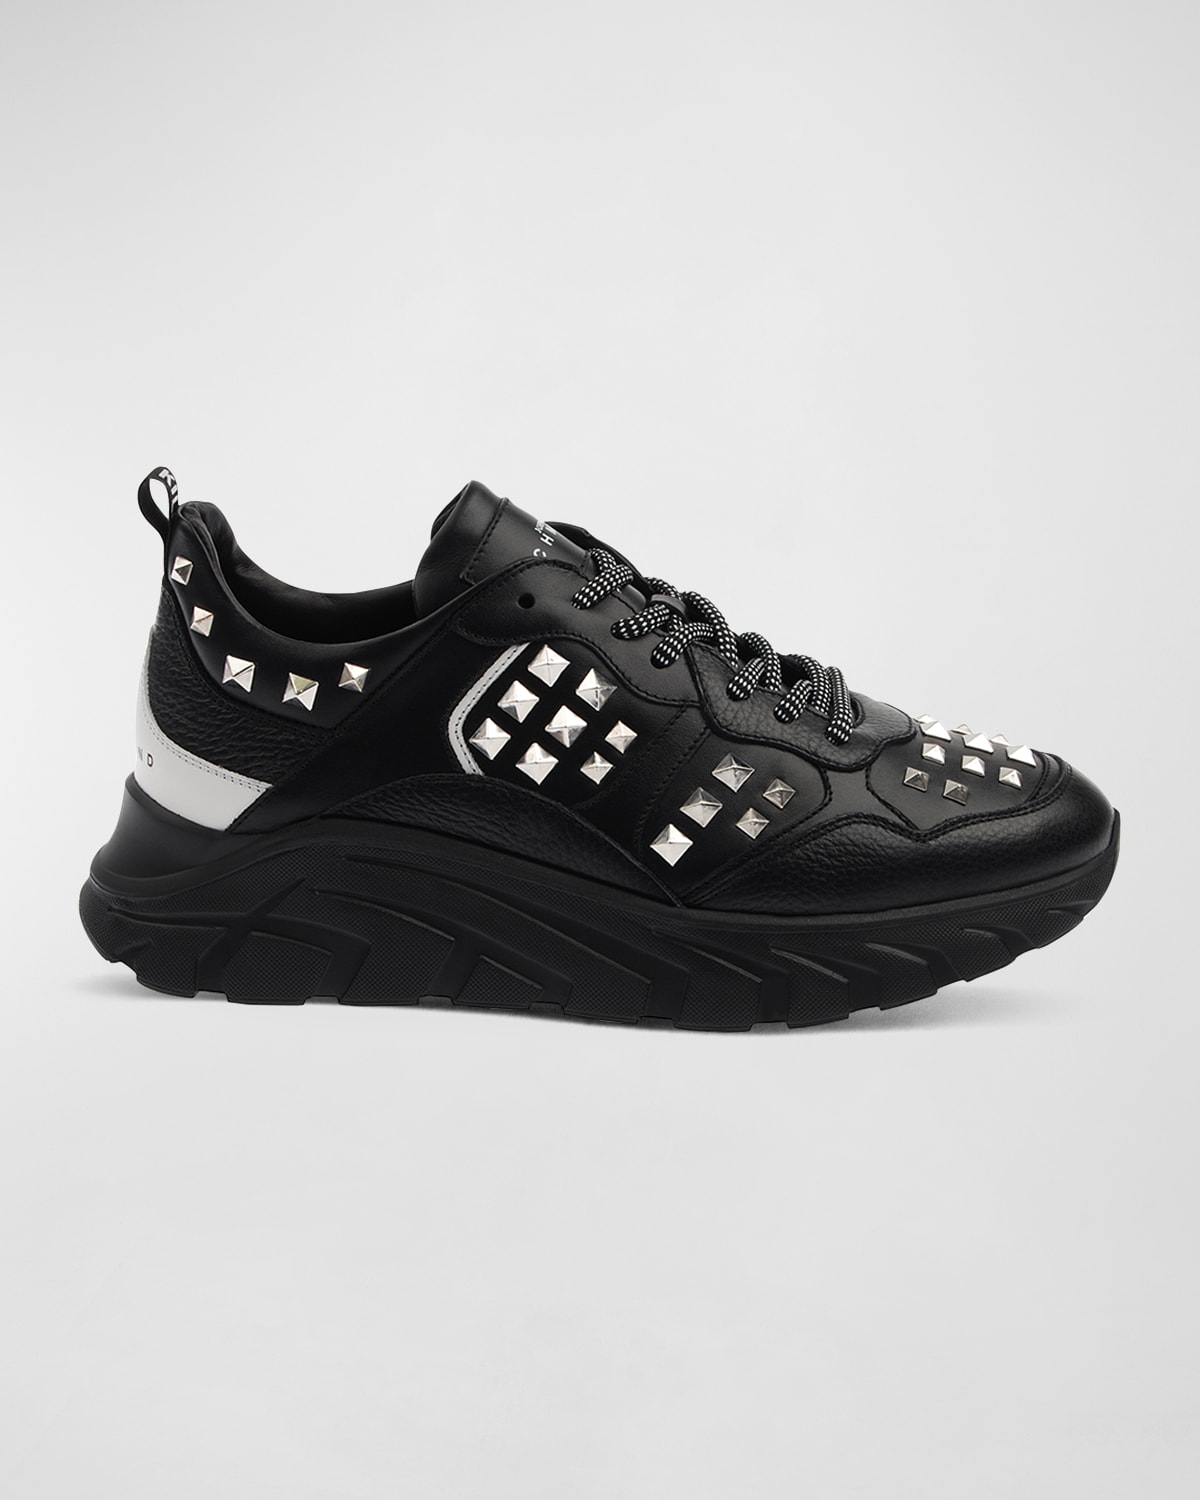 Men's Studded Leather Chunky Sneakers